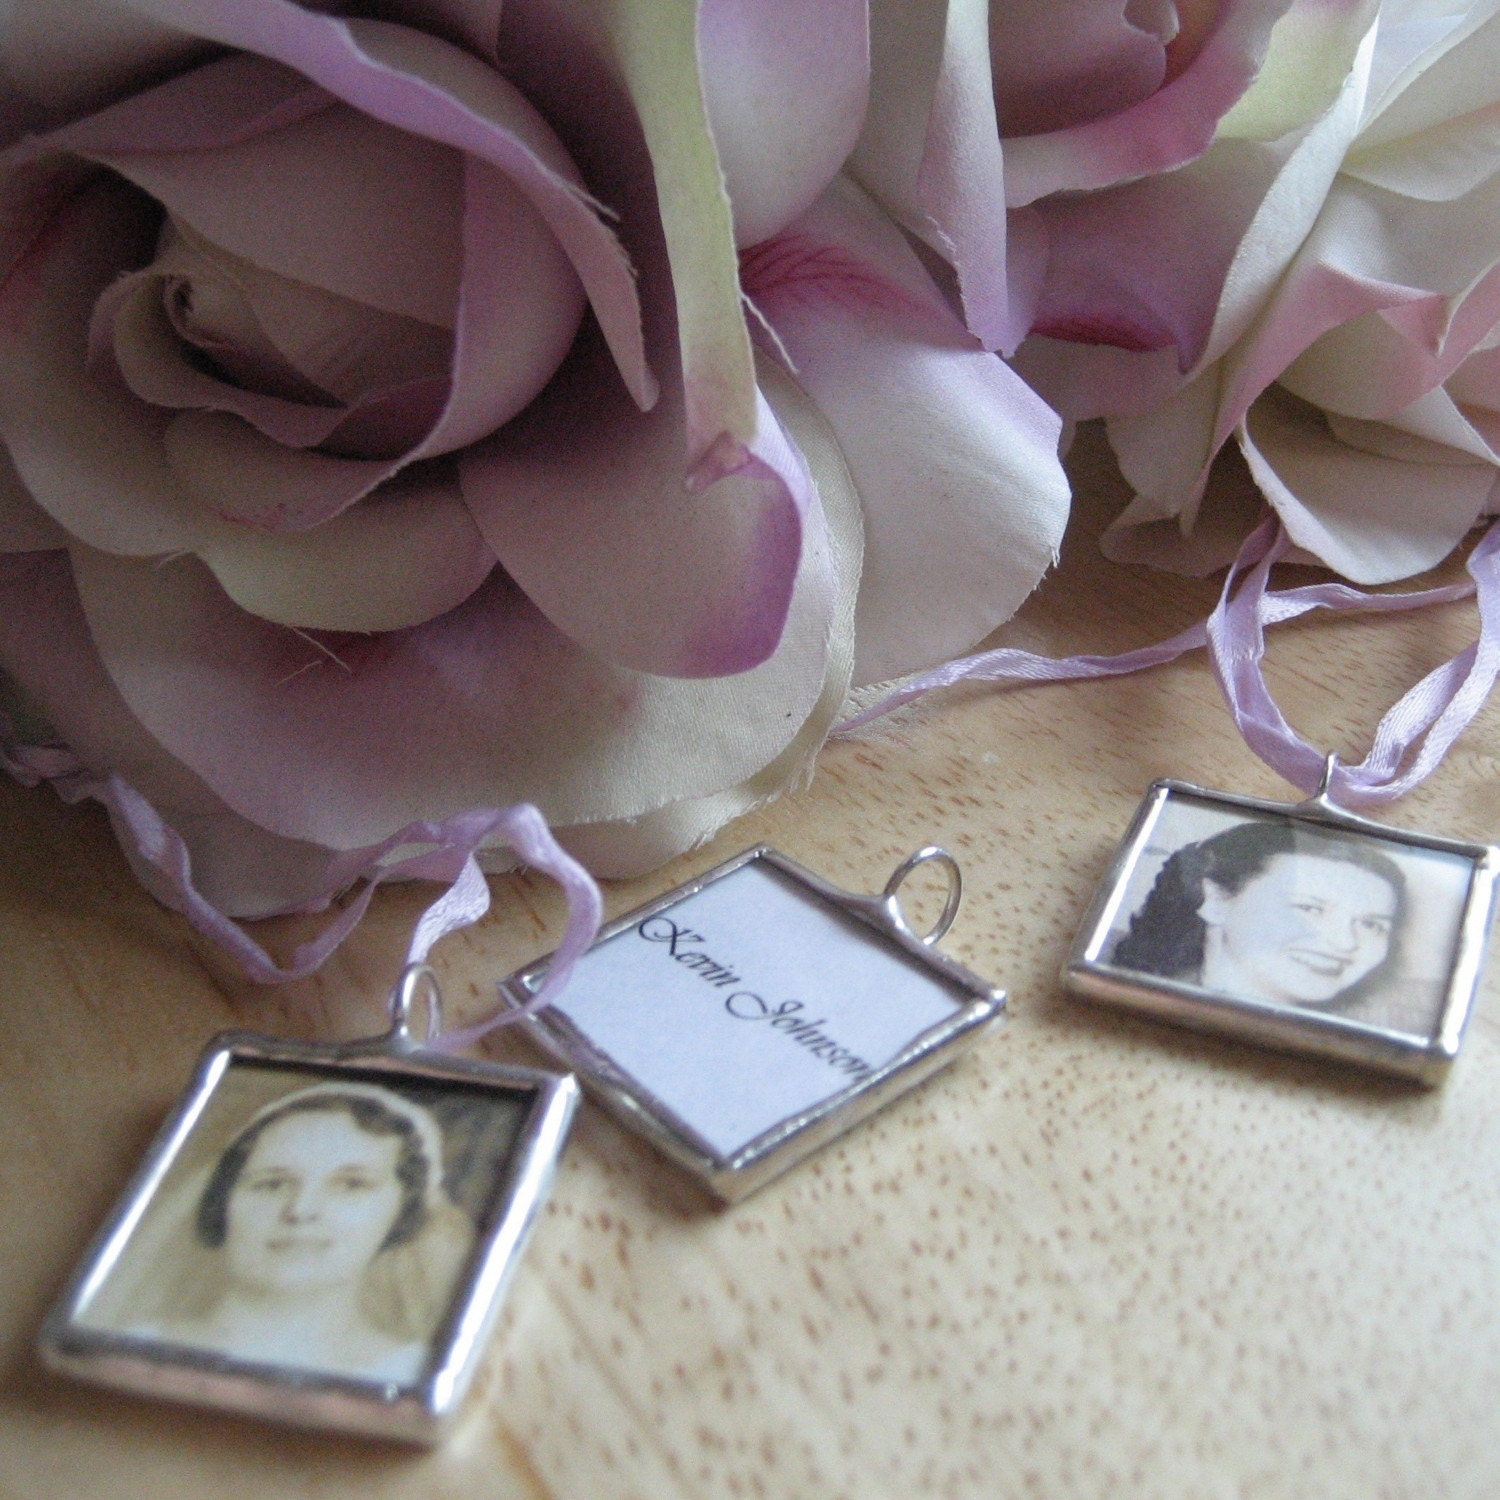 This is a listing for ONE custom memory charm that I will make to order for...